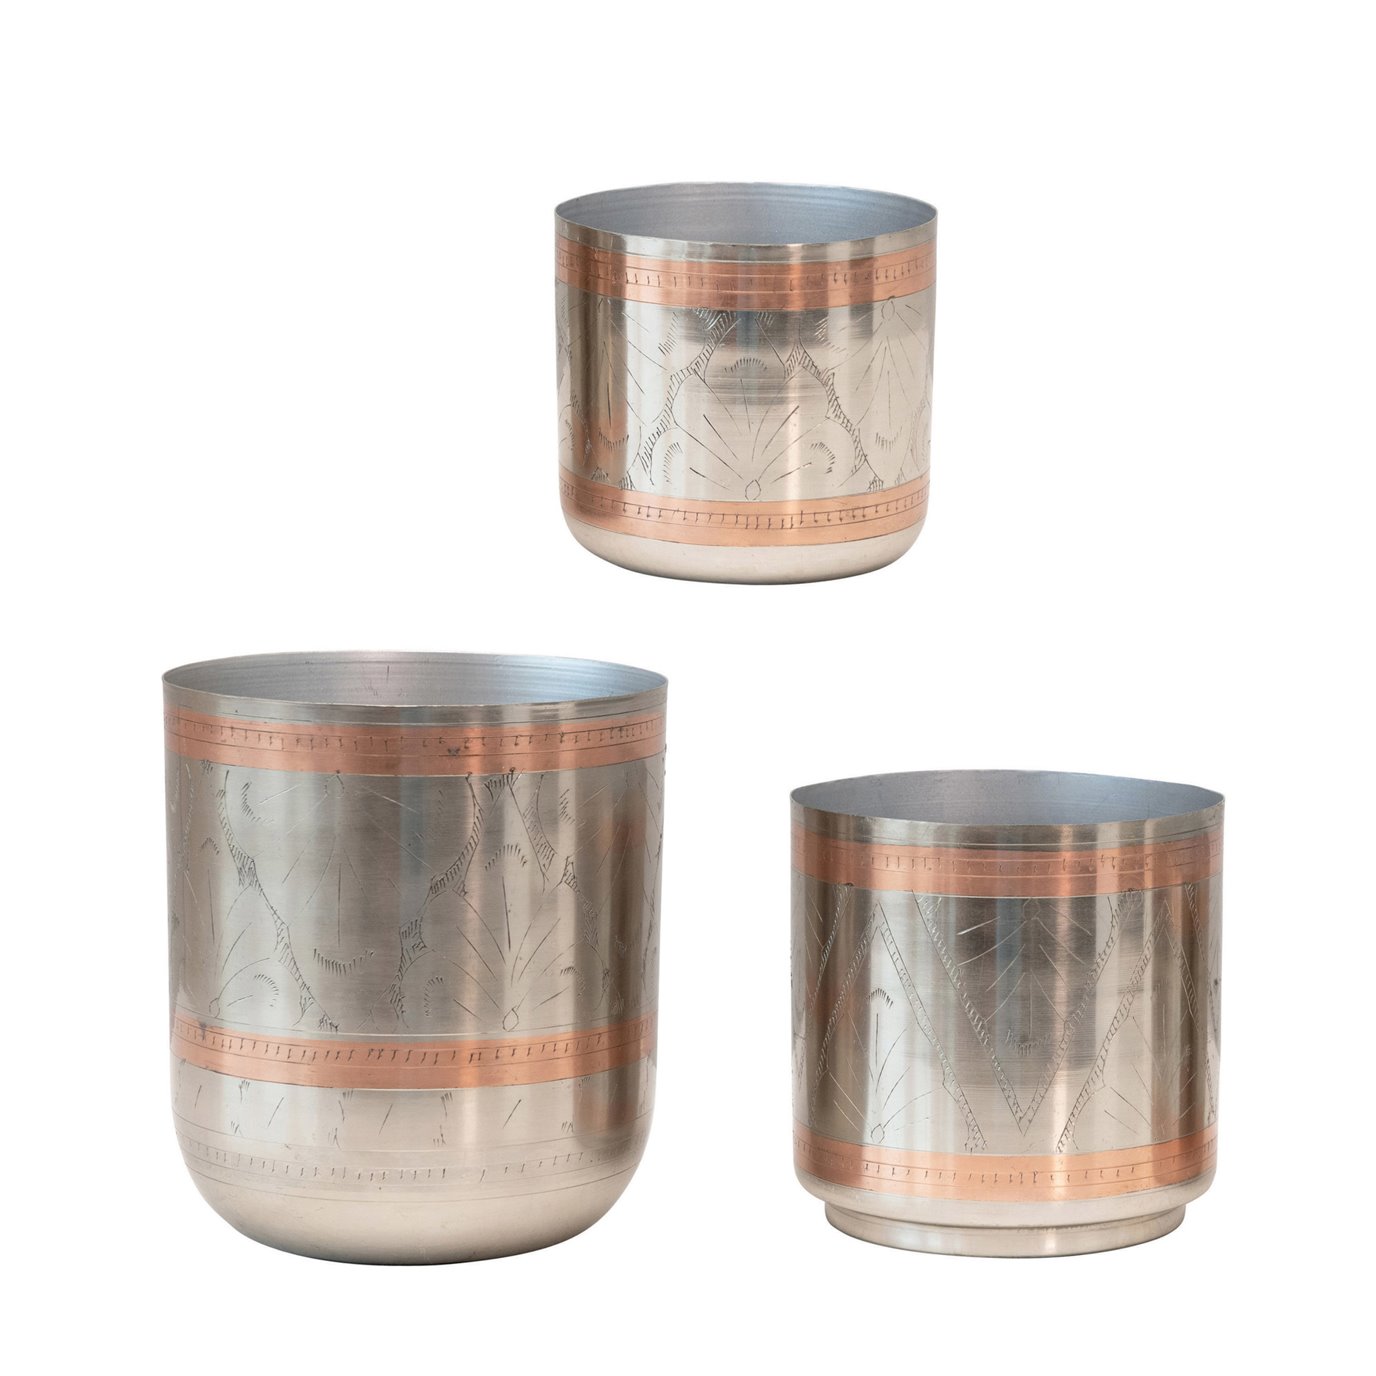 Engraved Metal Planters, Nickel Finish with Copper, Set of 3 (Holds 6", 5" & 4" Pots)